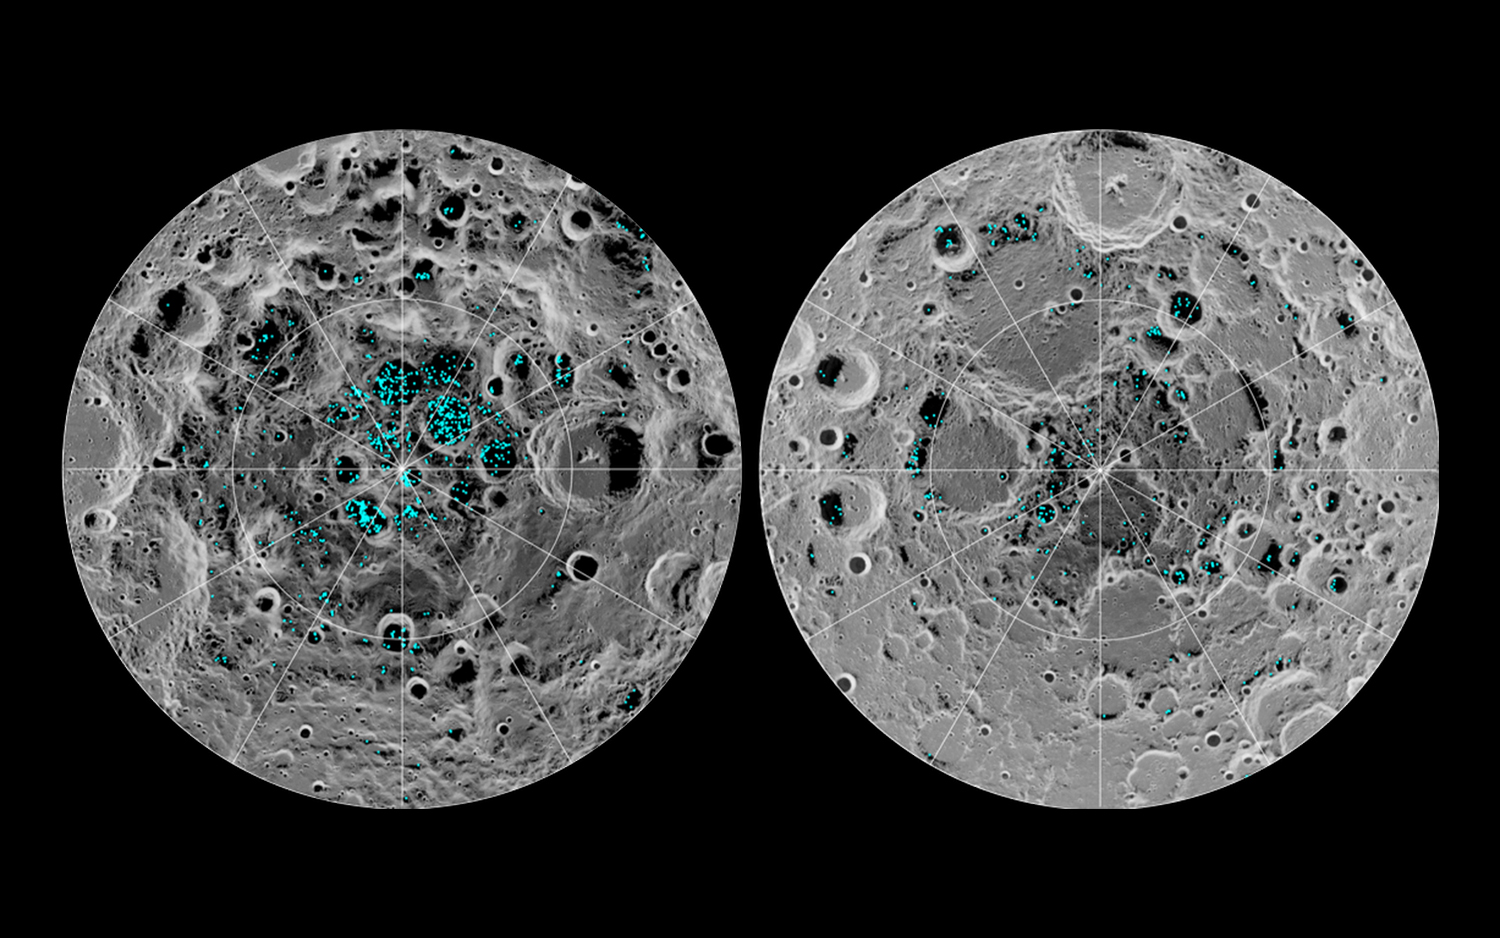 China will search for frozen water near the Moon's South Pole